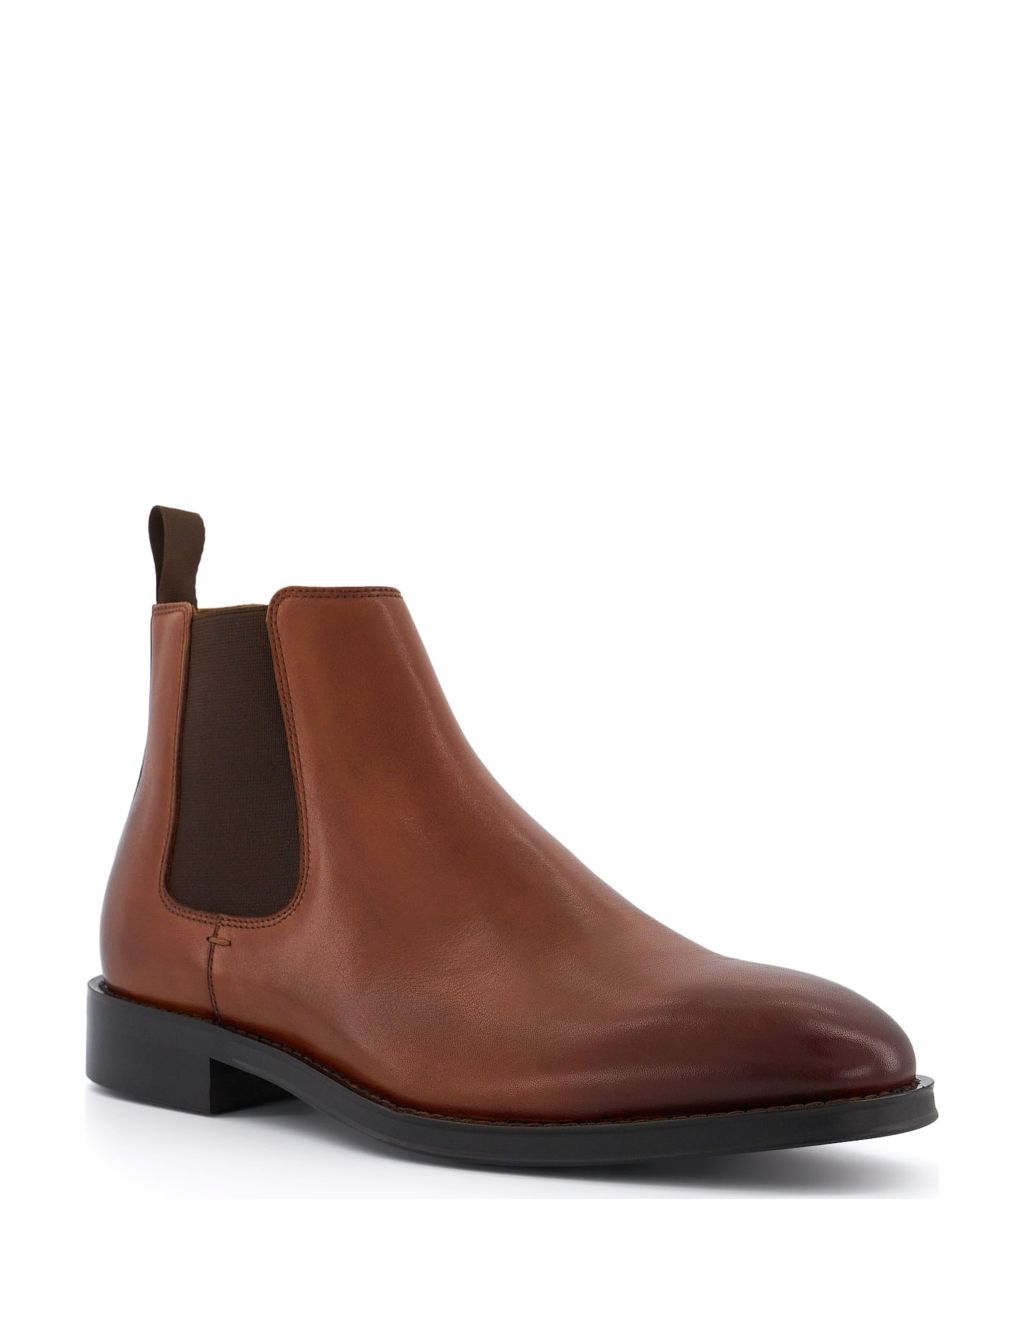 Suede Chelsea Boots image 2